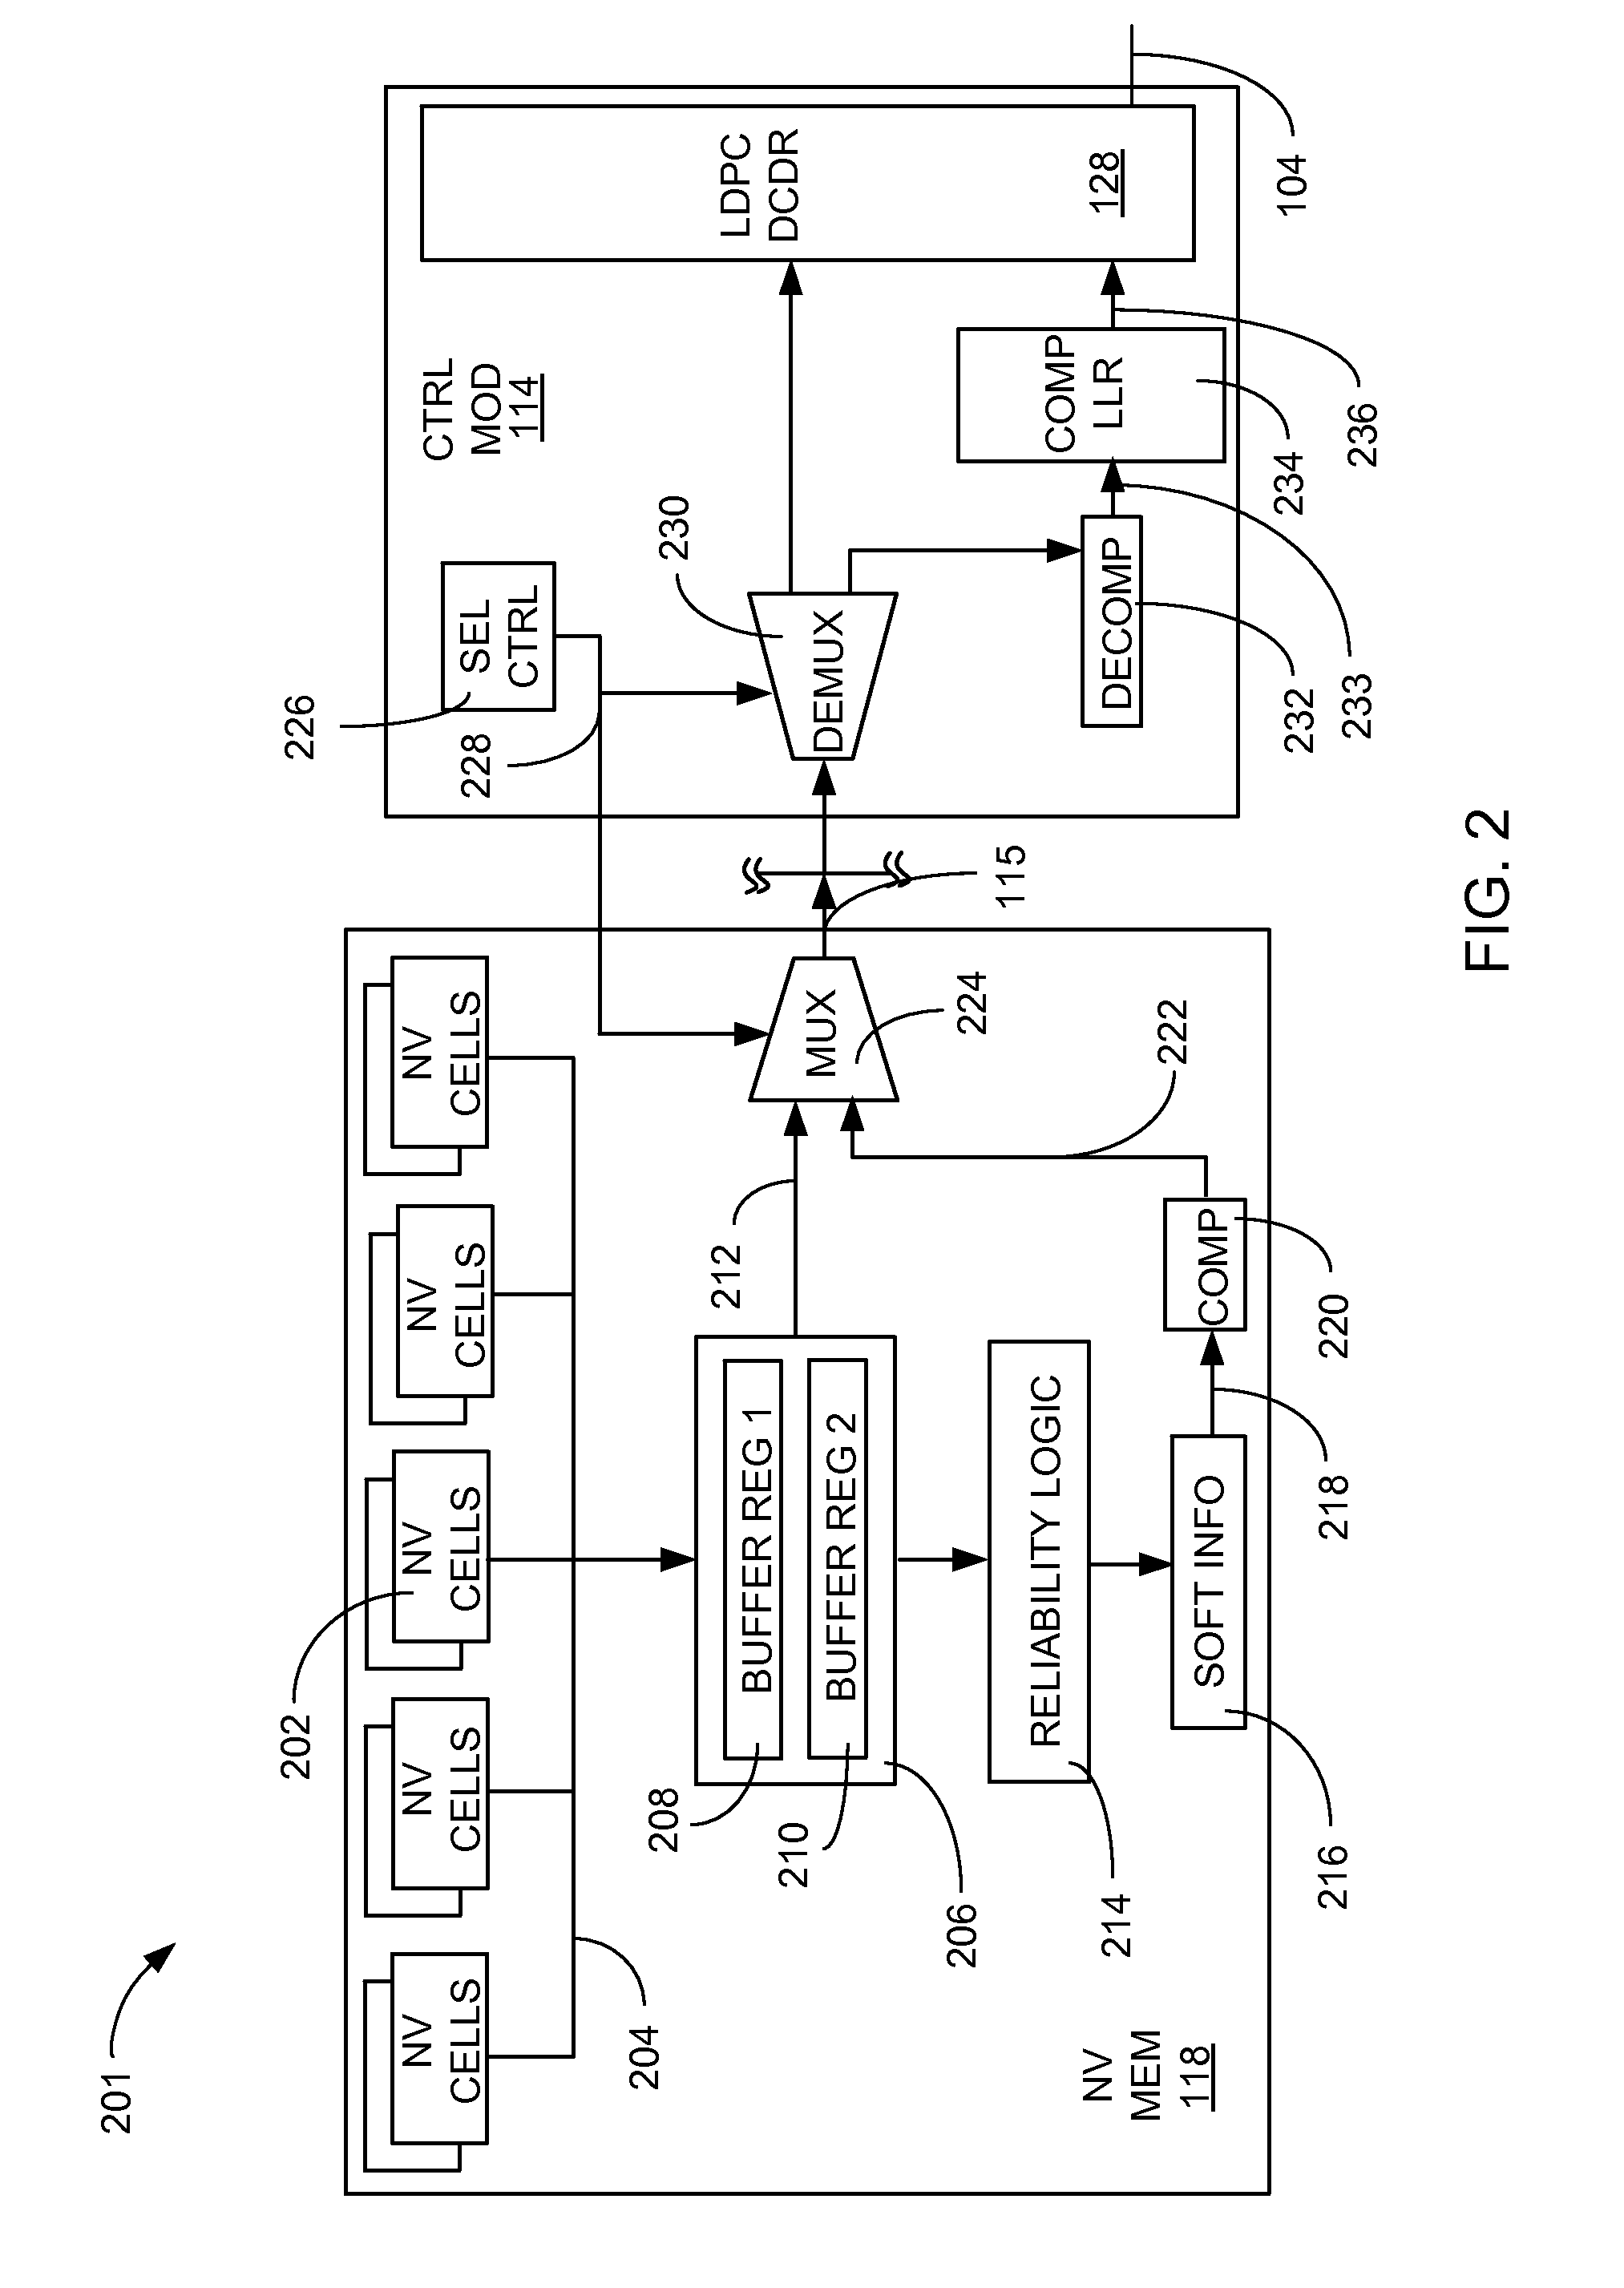 Bandwidth optimization in a non-volatile memory system